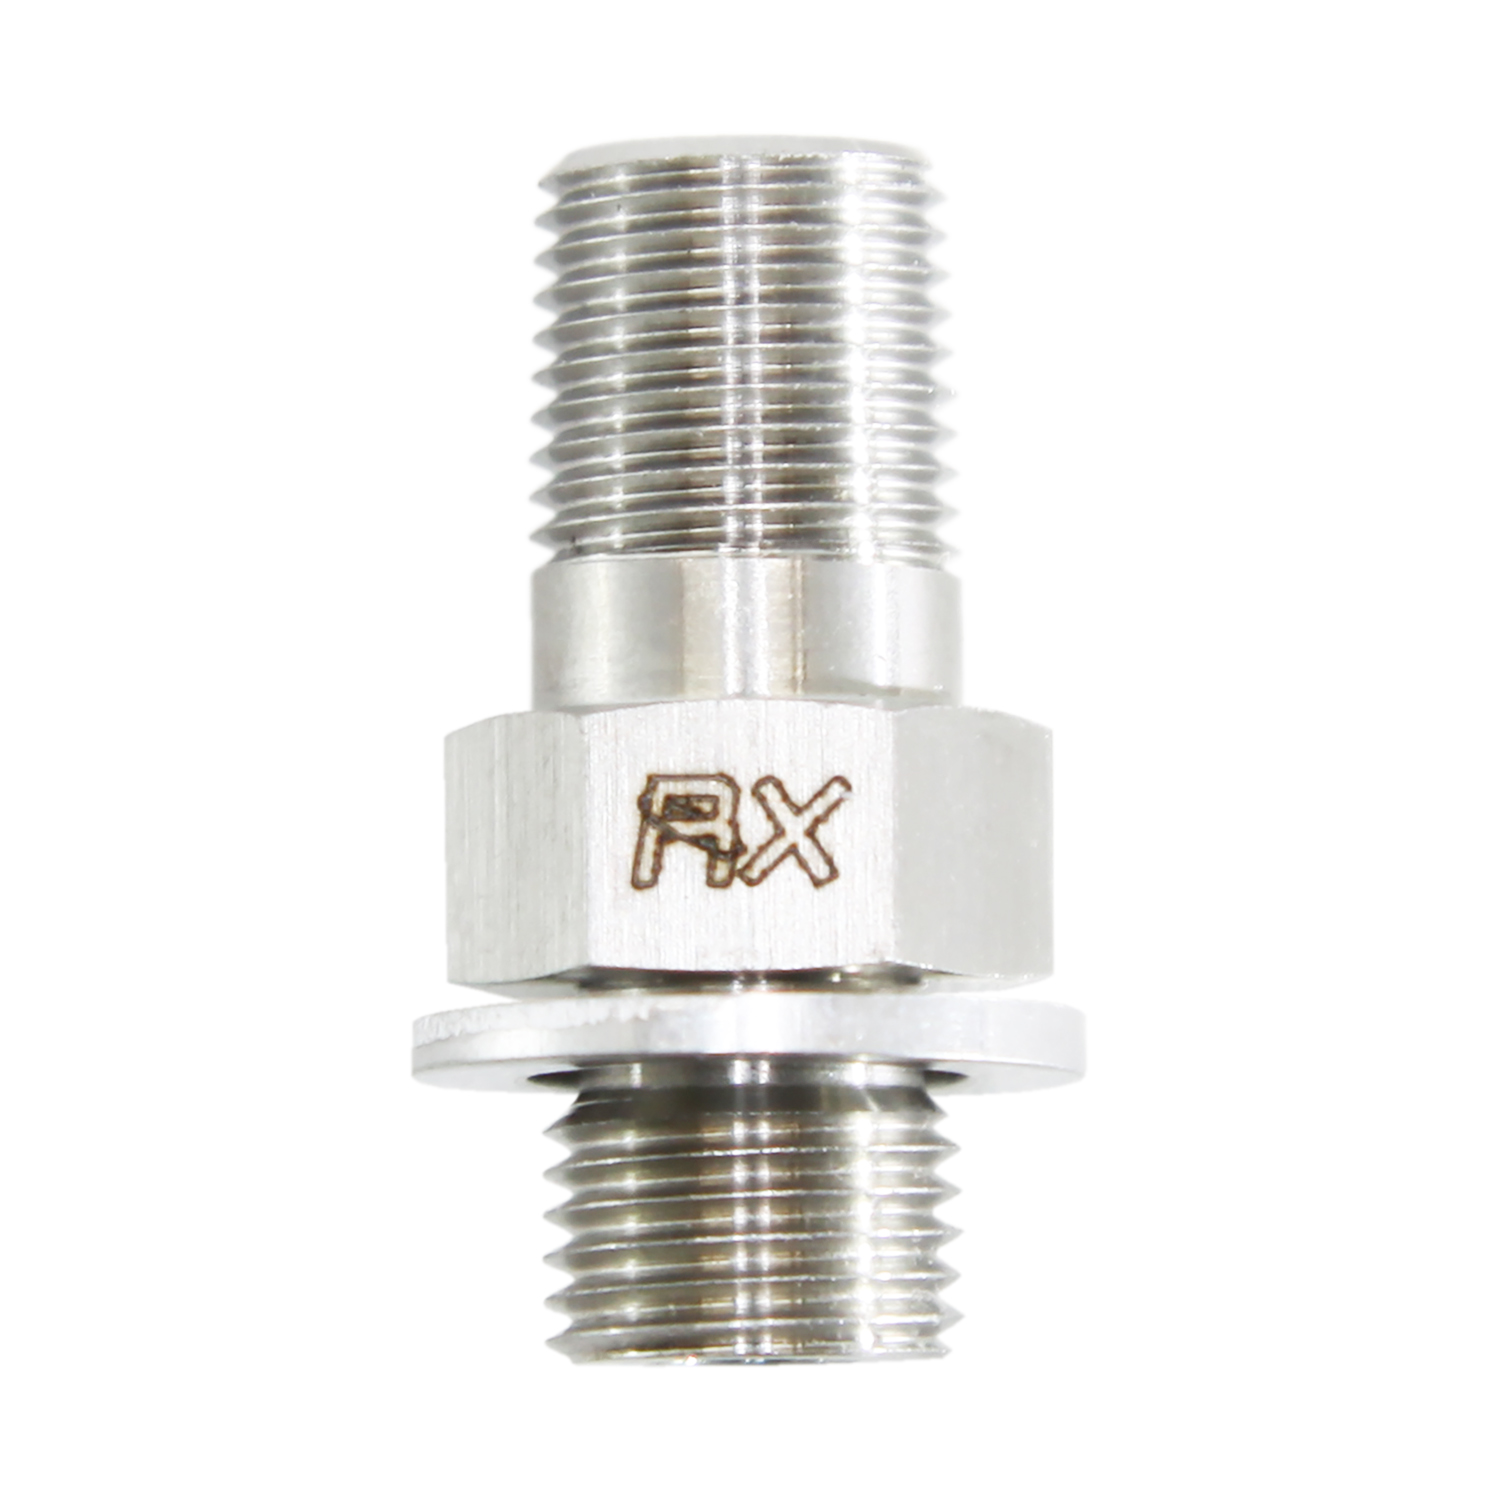 M10x1.0 Male to 1/8 NPT Female Stainless Sensor Fittings